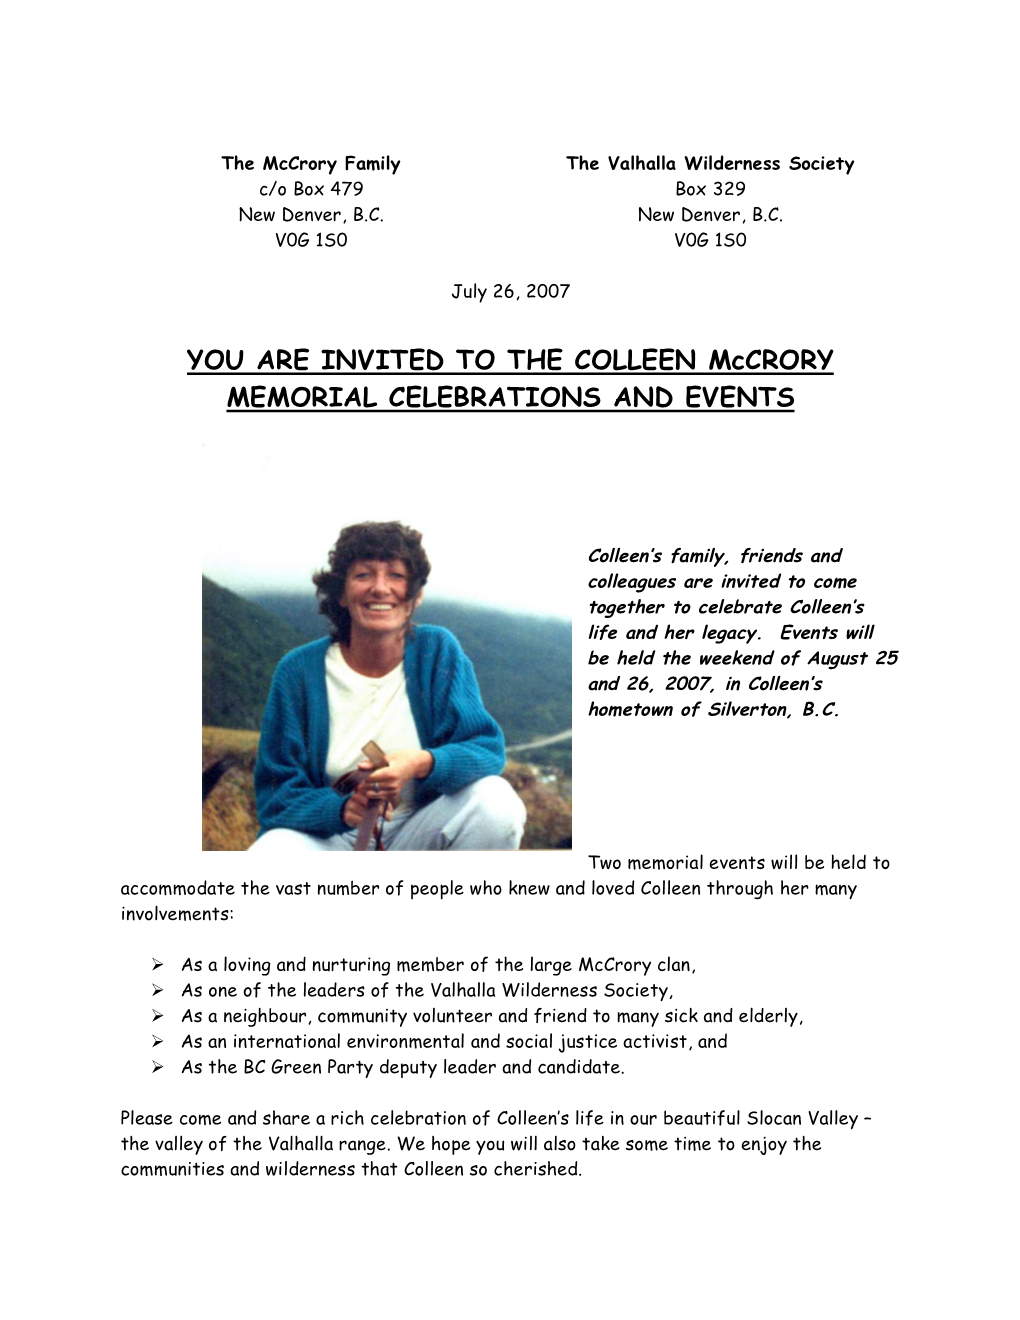 YOU ARE INVITED to the COLLEEN Mccrory MEMORIAL CELEBRATIONS and EVENTS